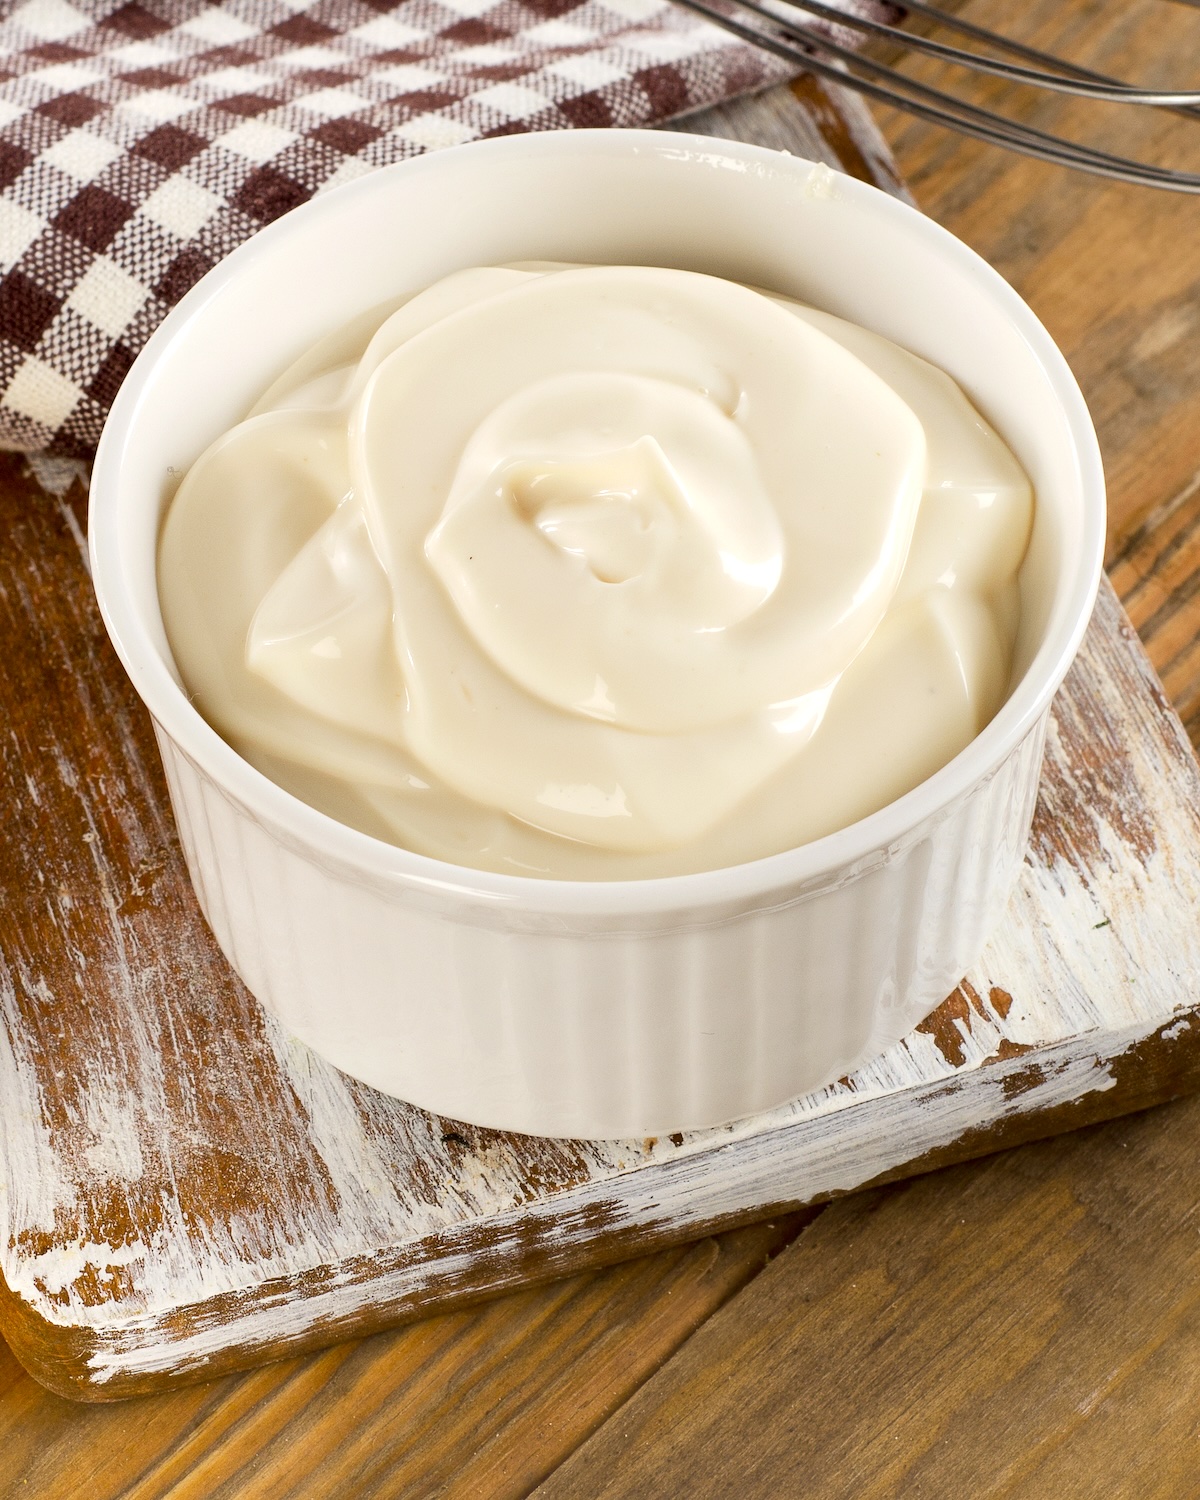 Mayonnaise in a bowl on wooden background.